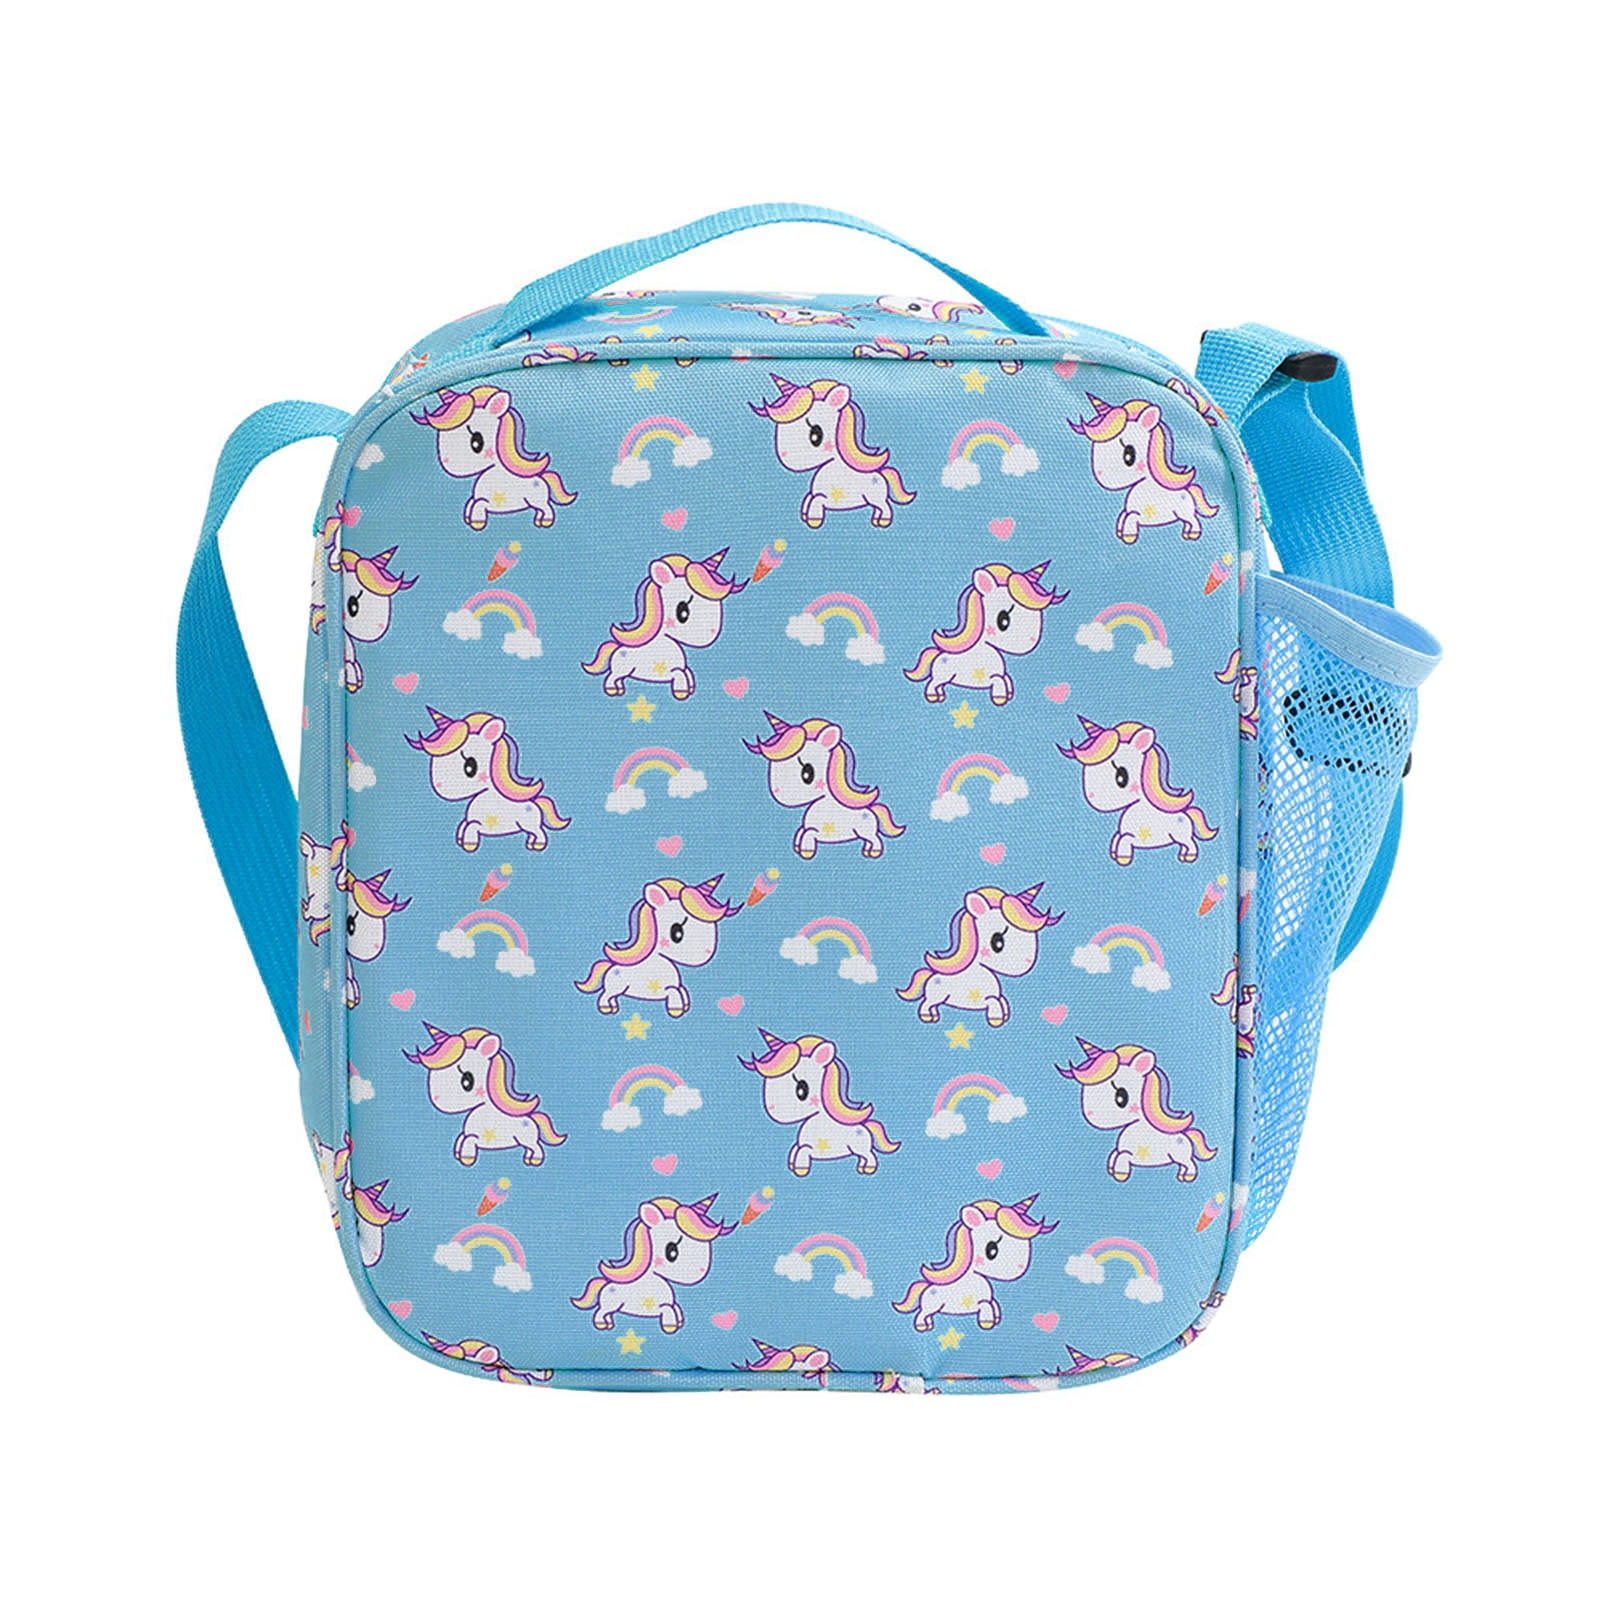 Lunch Bags Kids by Snack Attack Insulated Lunch Boxes Bag Girls Boys,  Stylish Food Grade Kids lunch boxes for Toddler Girls Boys School, Aqua  Unicorn